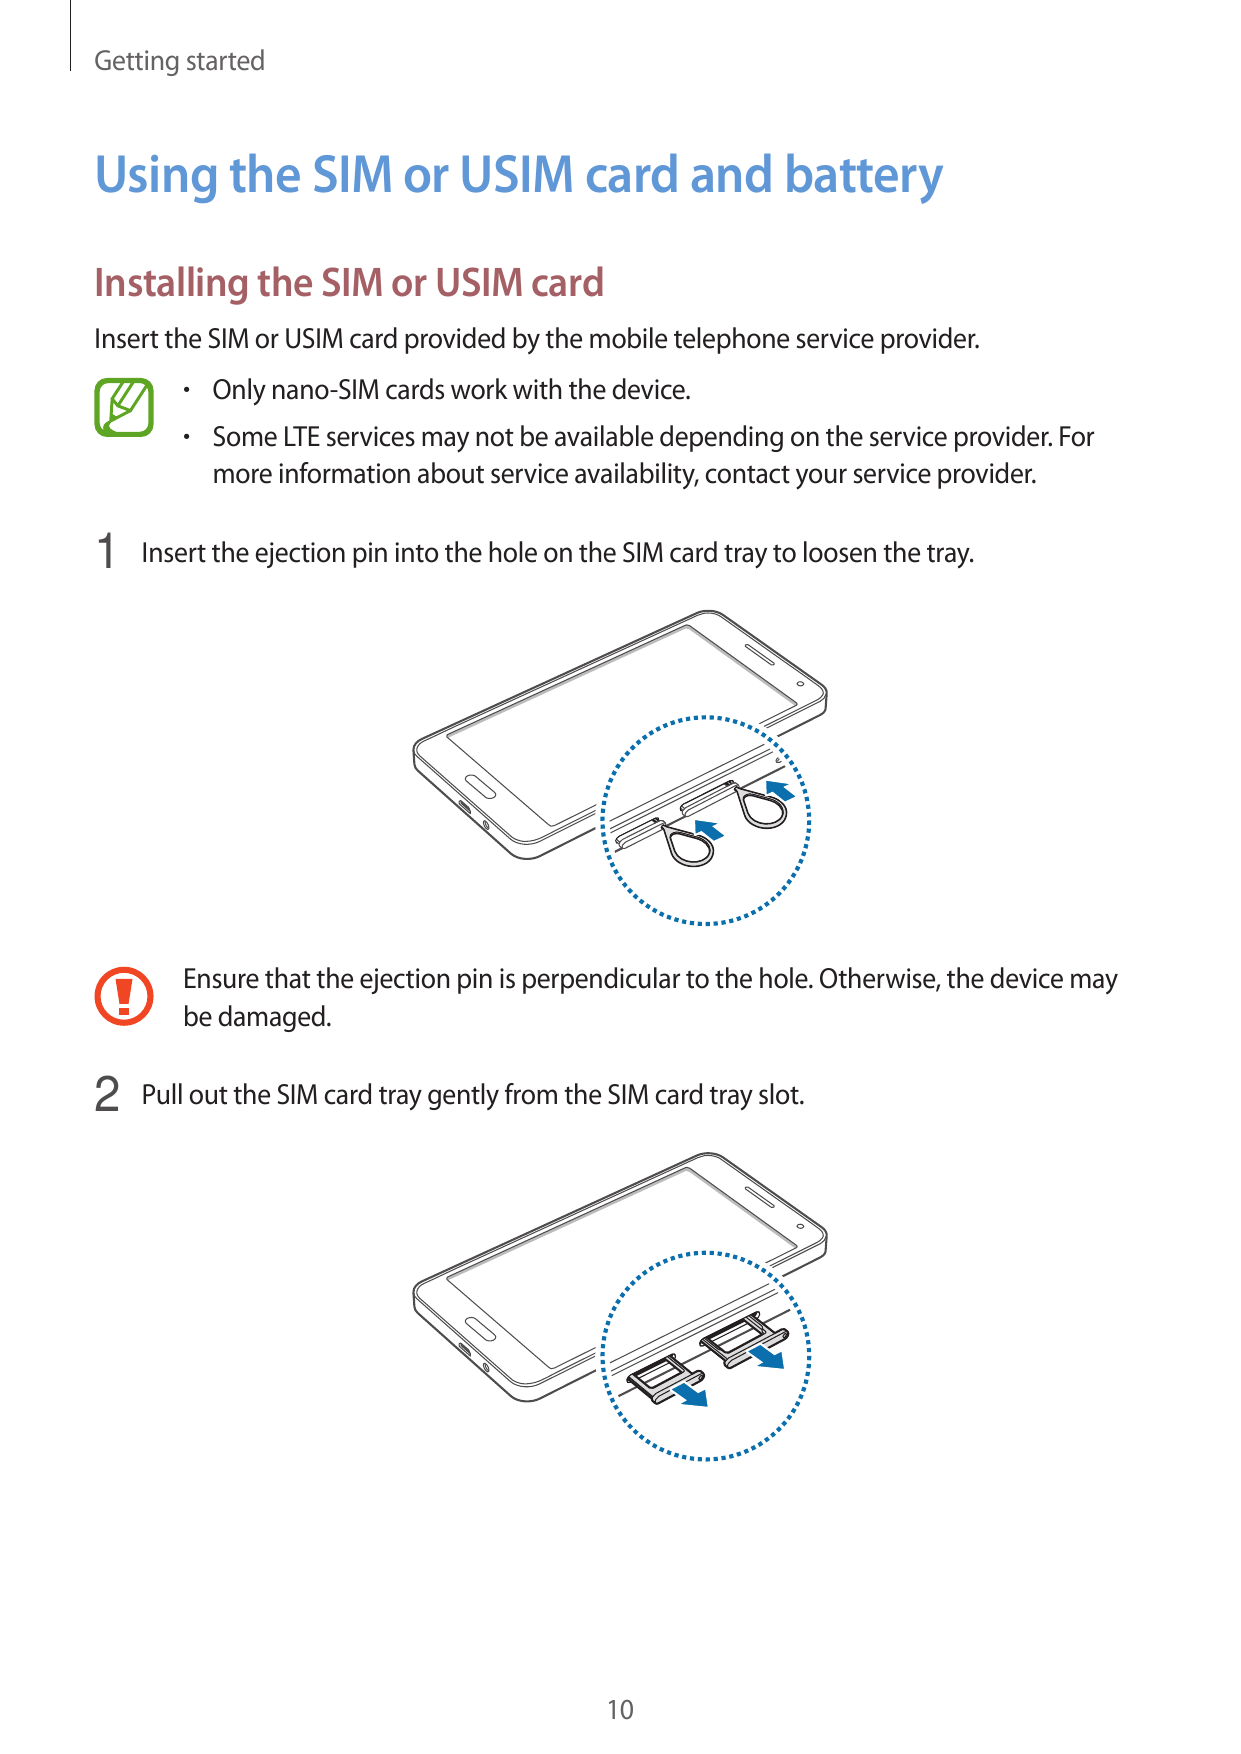 Getting startedUsing the SIM or USIM card and batteryInstalling the SIM or USIM cardInsert the SIM or USIM card provided by the 